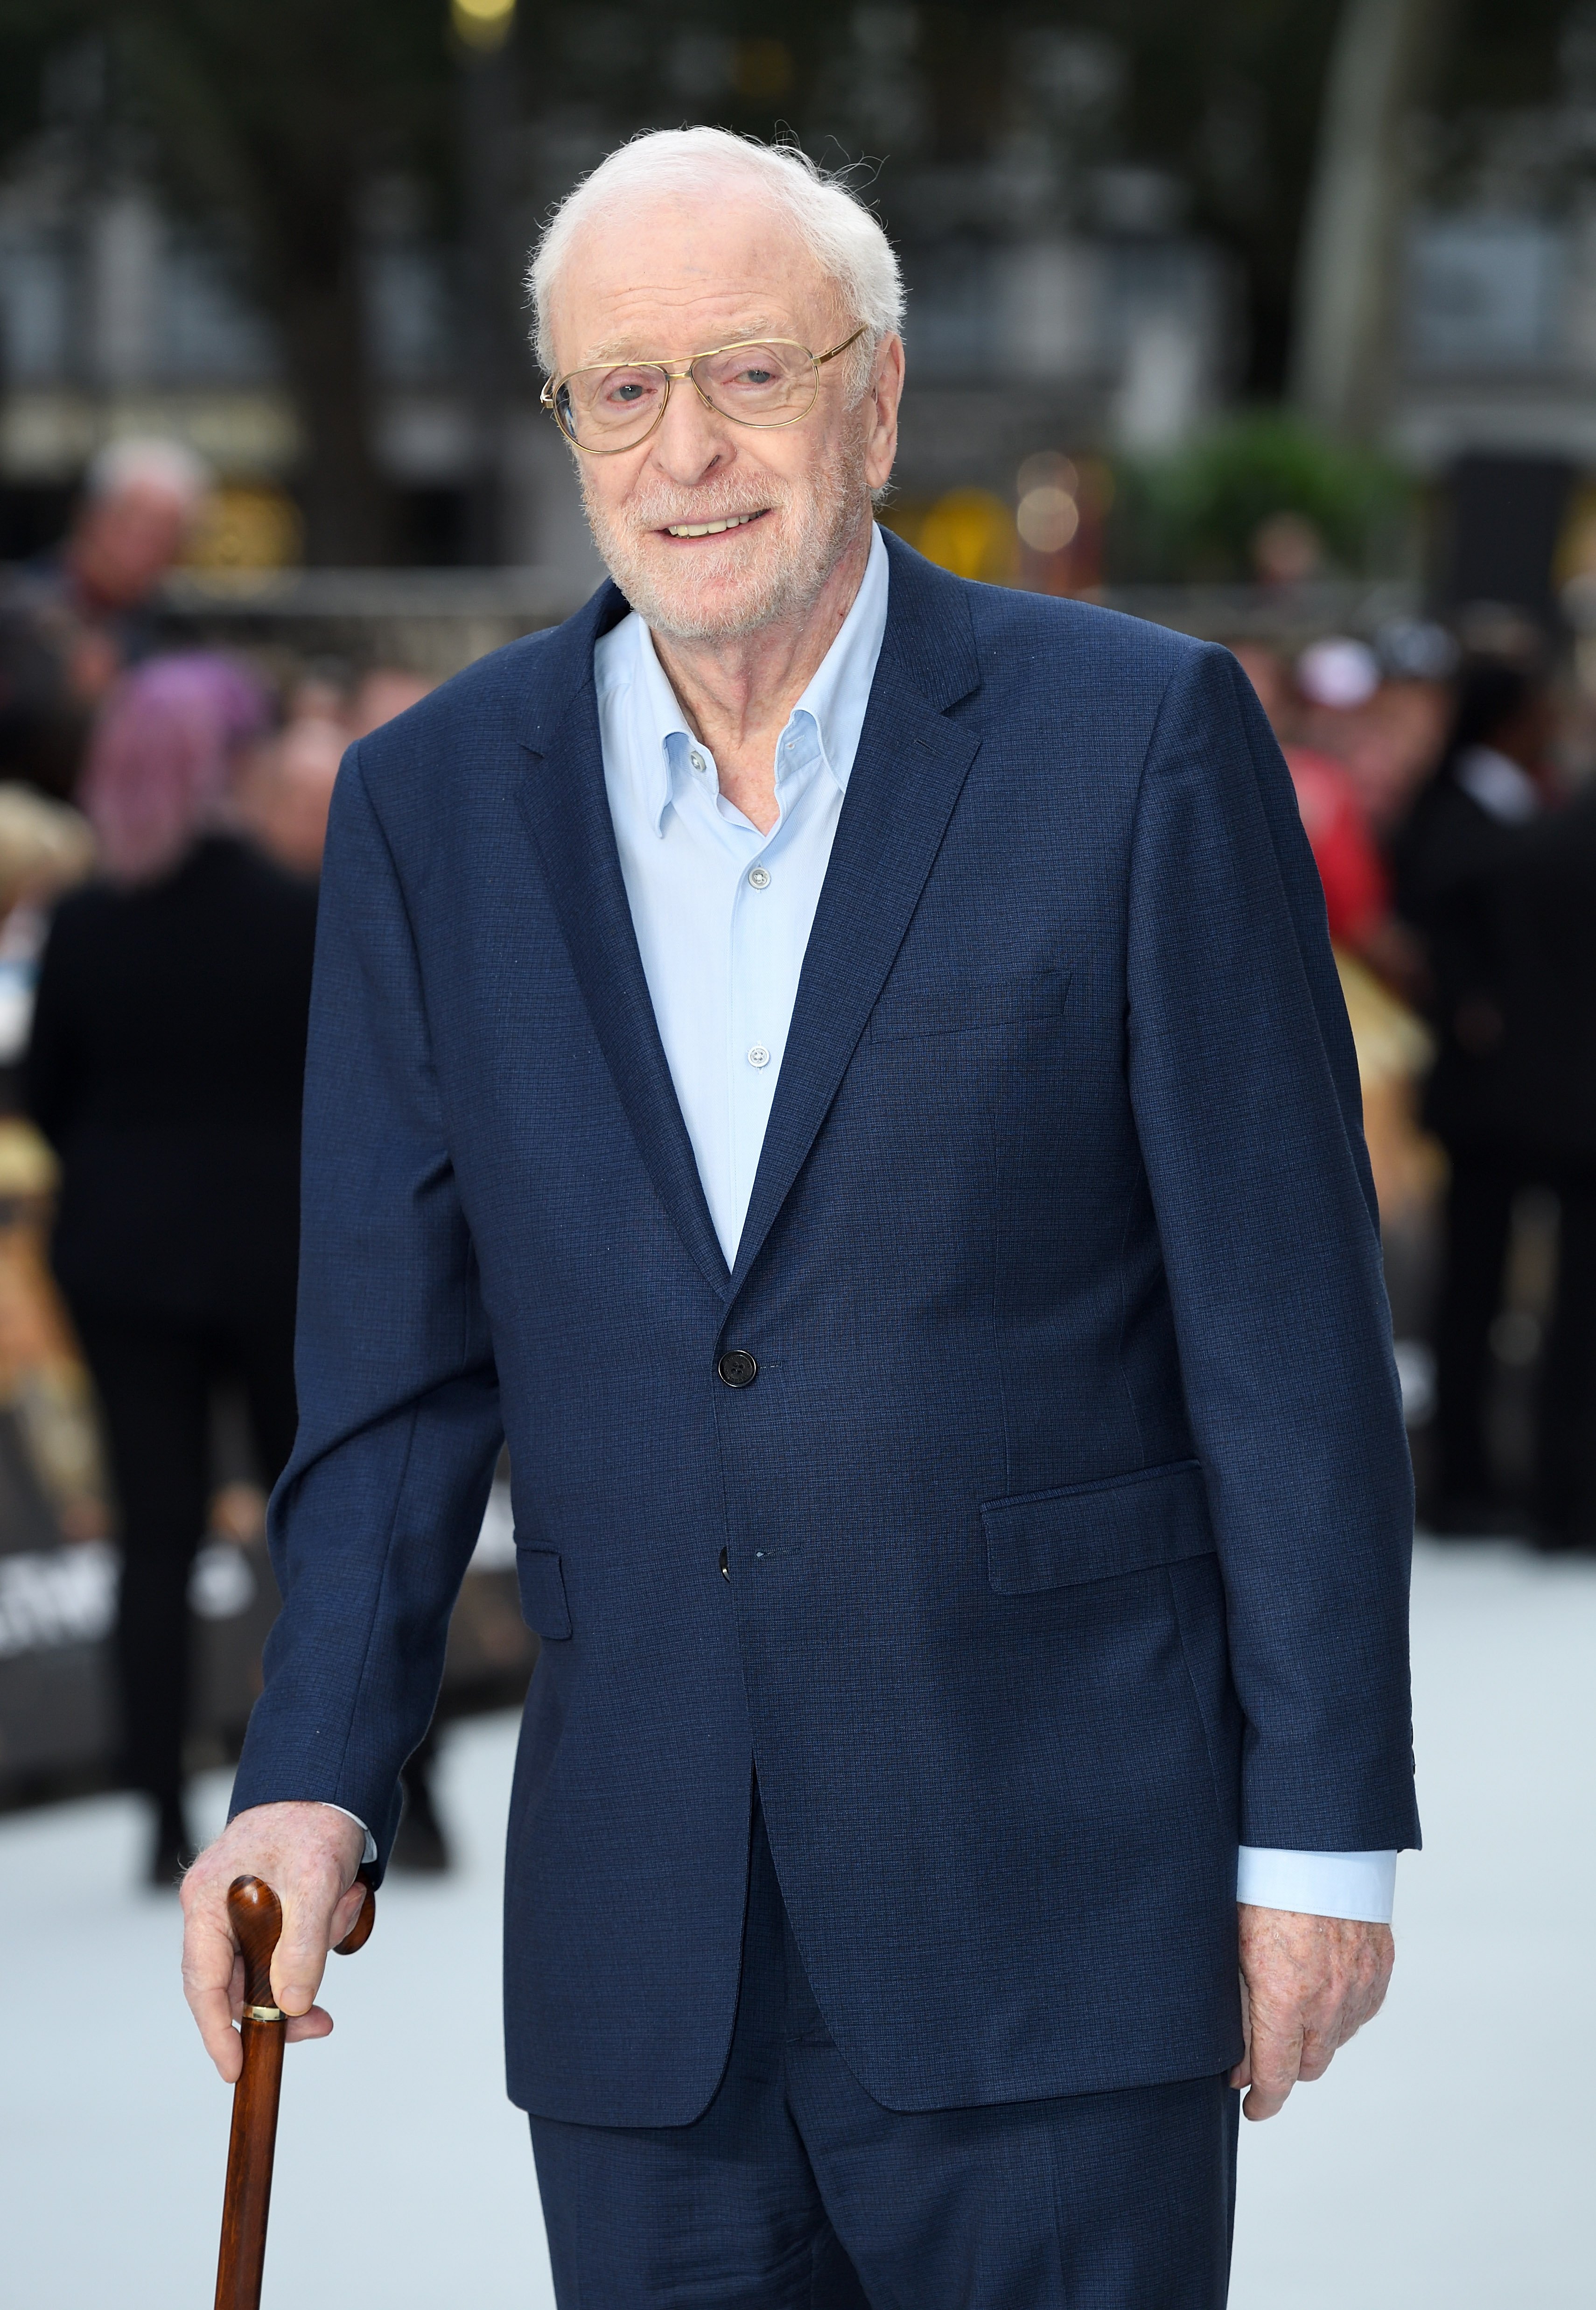 Sir Michael Caine attending the World Premiere of "King Of Thieves" at Vue West End on September 12, 2018 in London, England. / Source: Getty Images